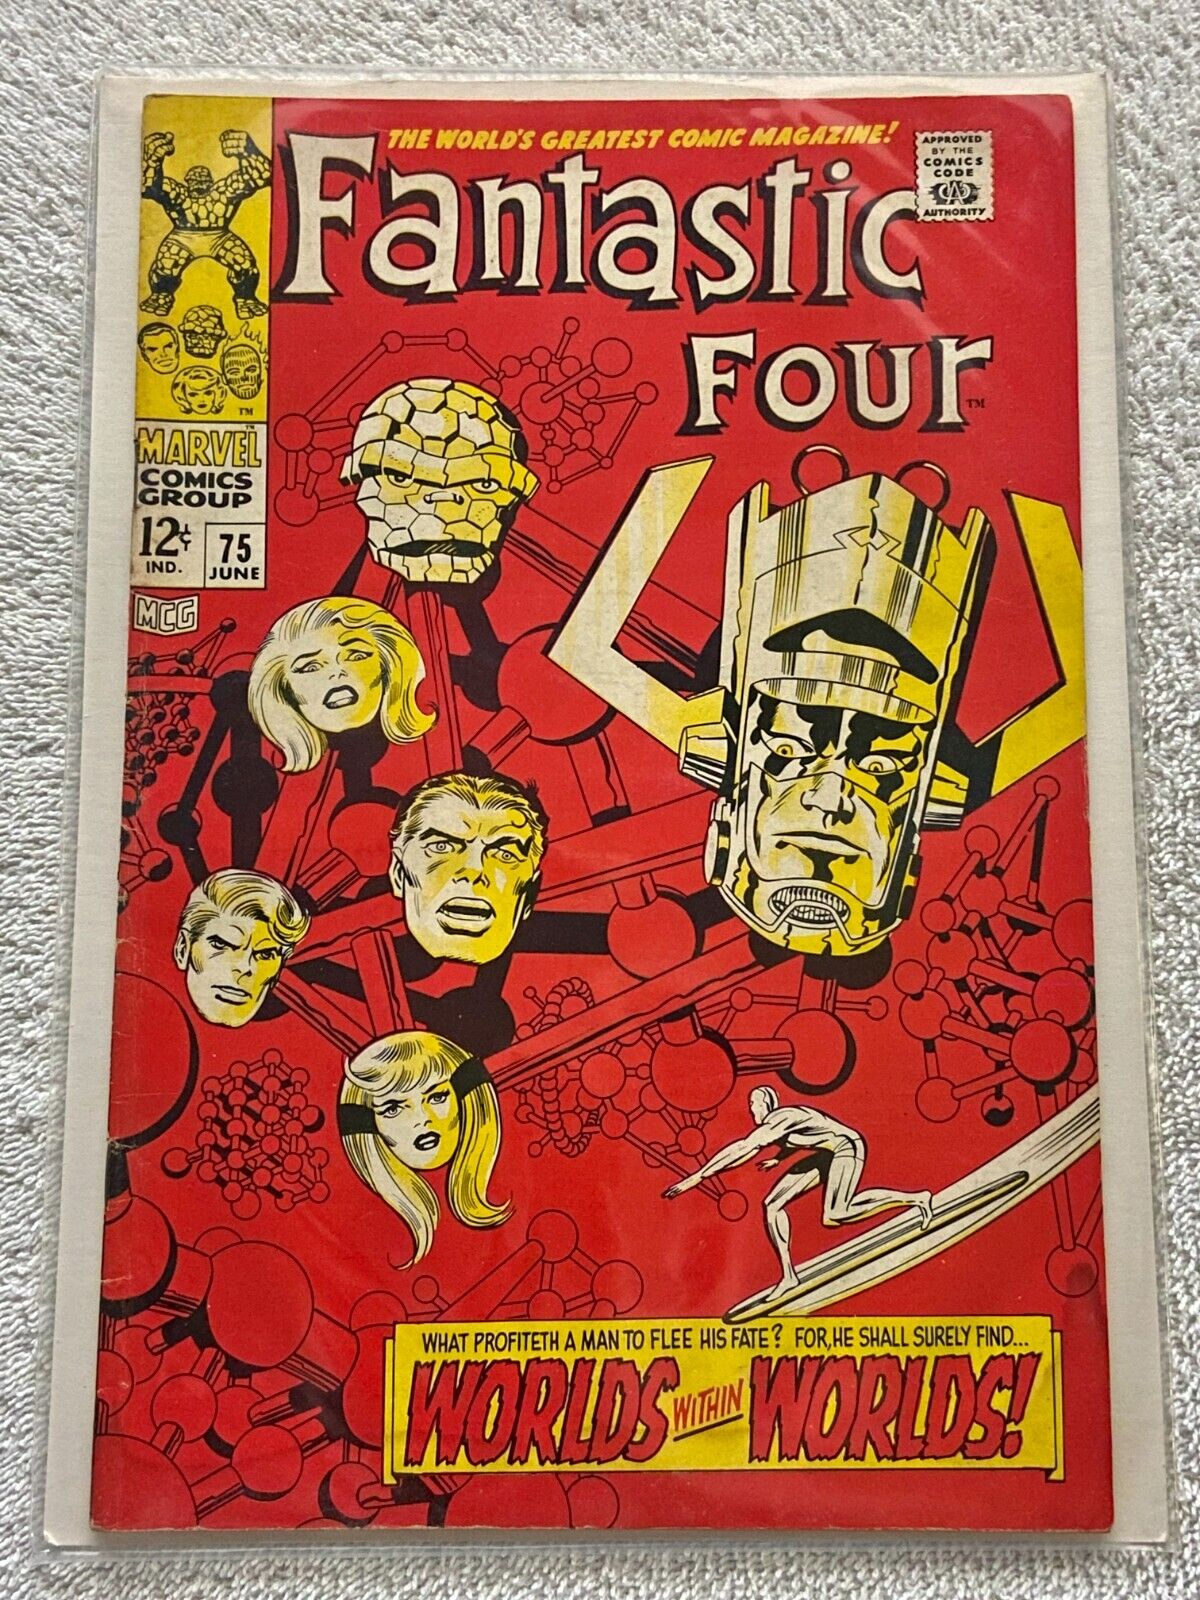 Fantastic Four #75, 1968 Marvel Comics, Silver Surfer Galactus, Jack Kirby Cover